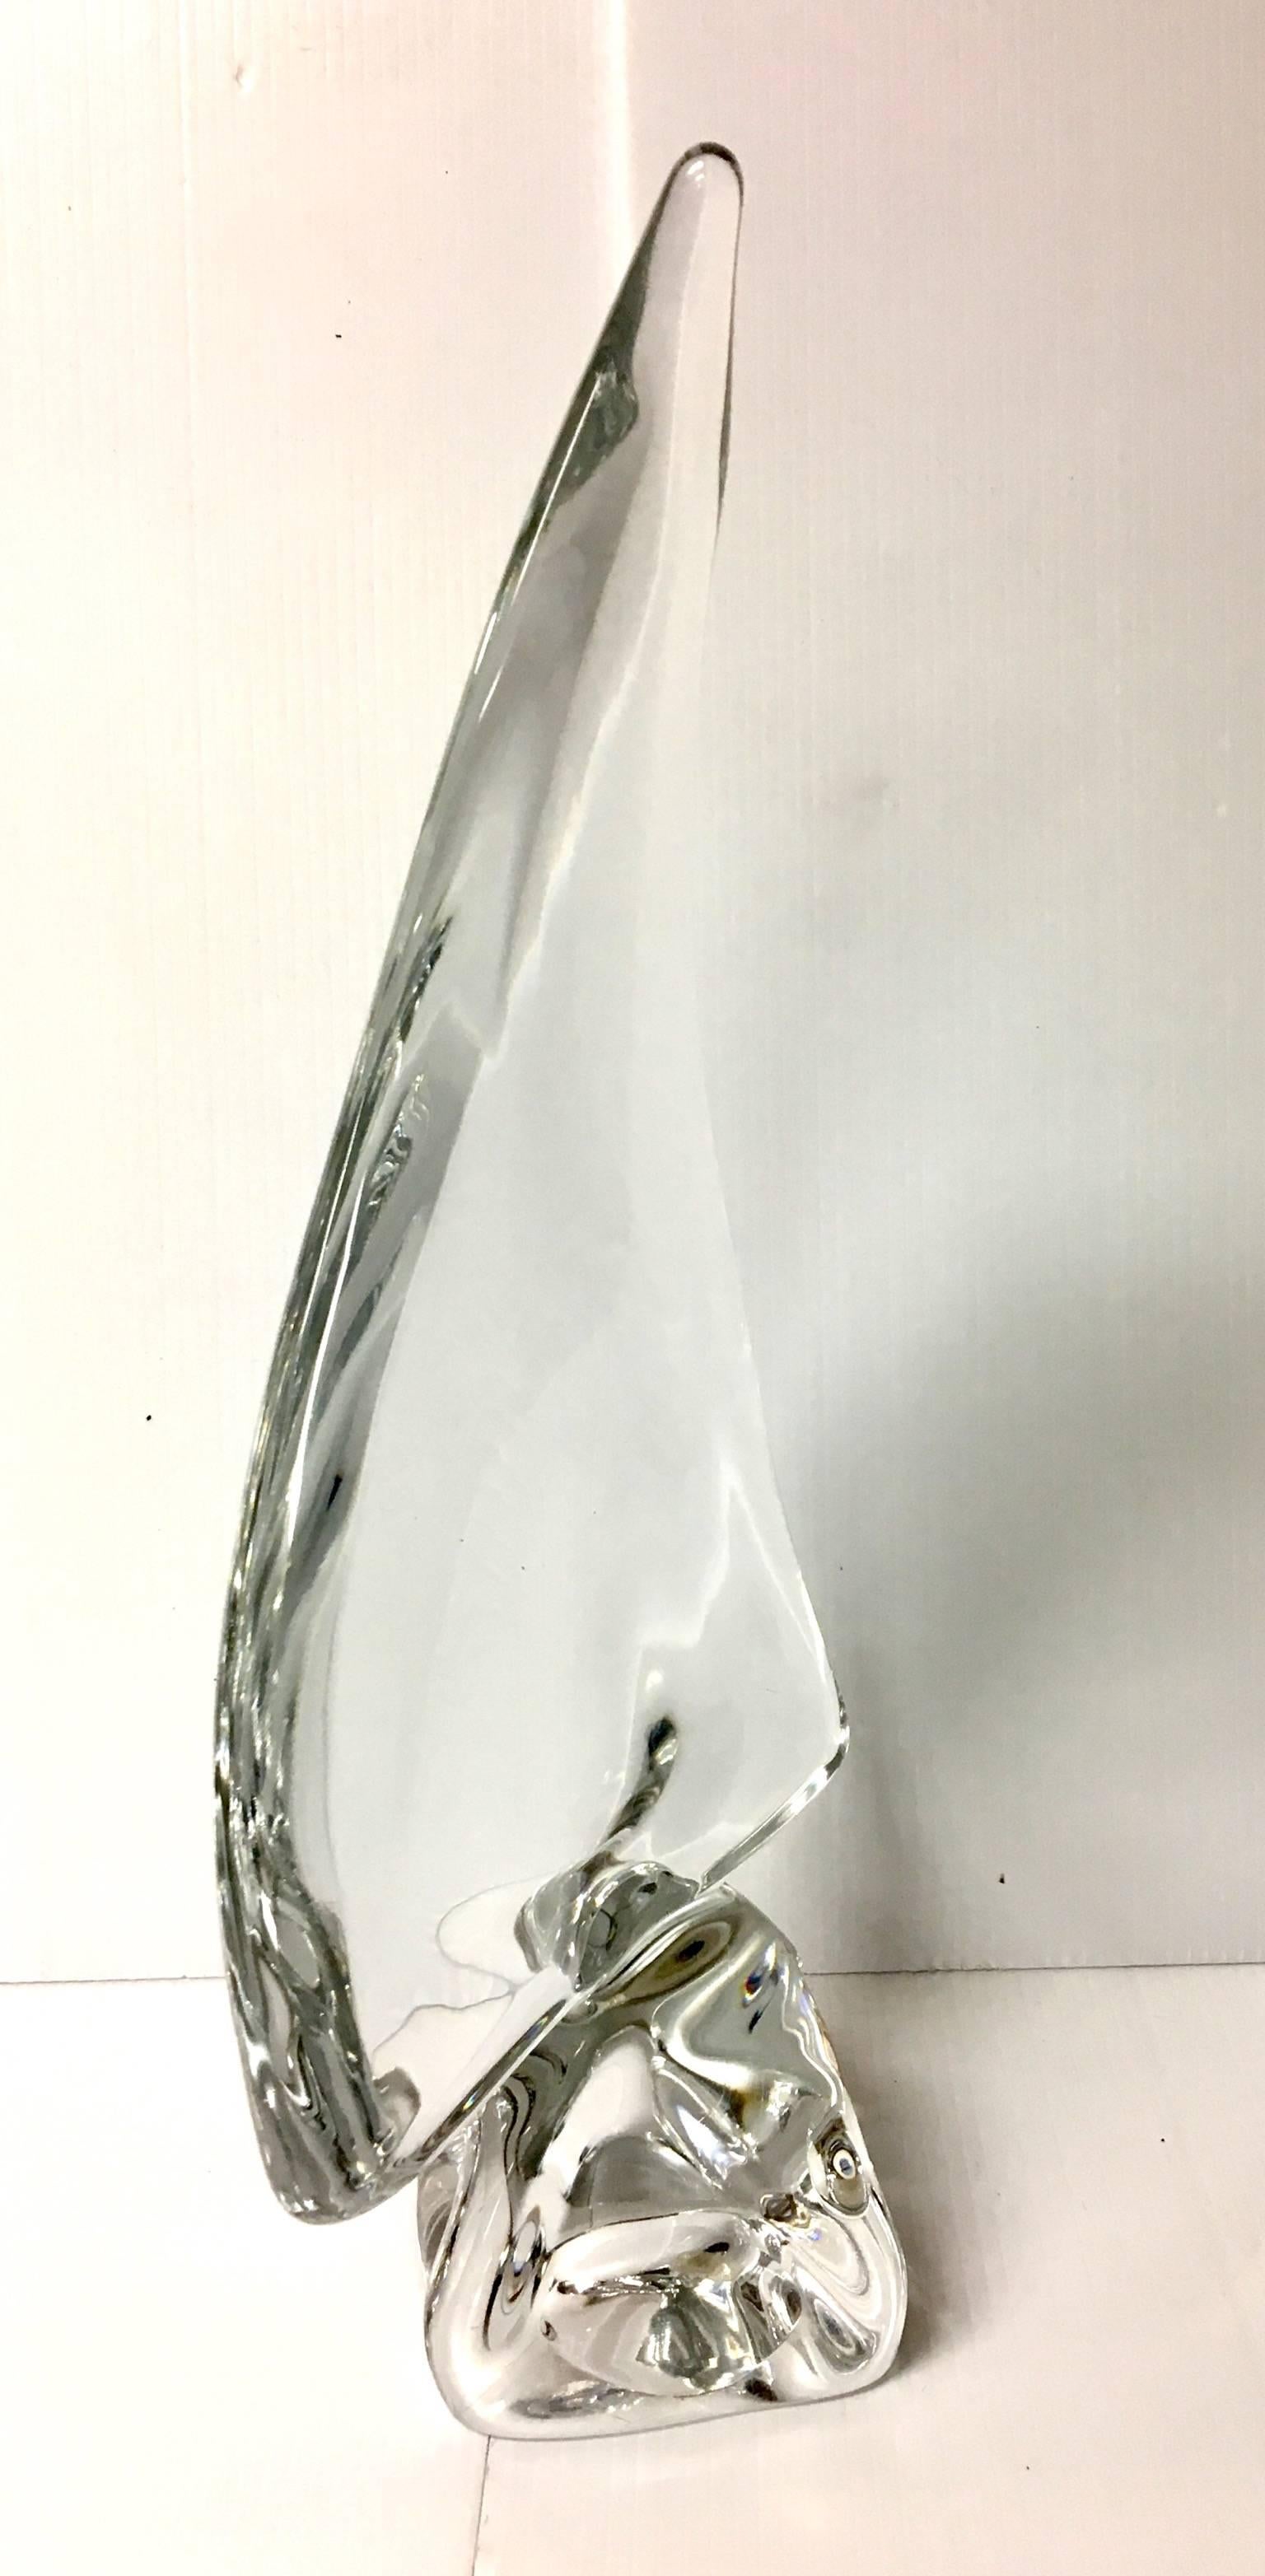 Large crystal sailboat sculpture by Daum, France, circa 1970s. Etched signature reads "Daum" this is a large version of this stunning work of art. Excellent condition. No chips, scratches.